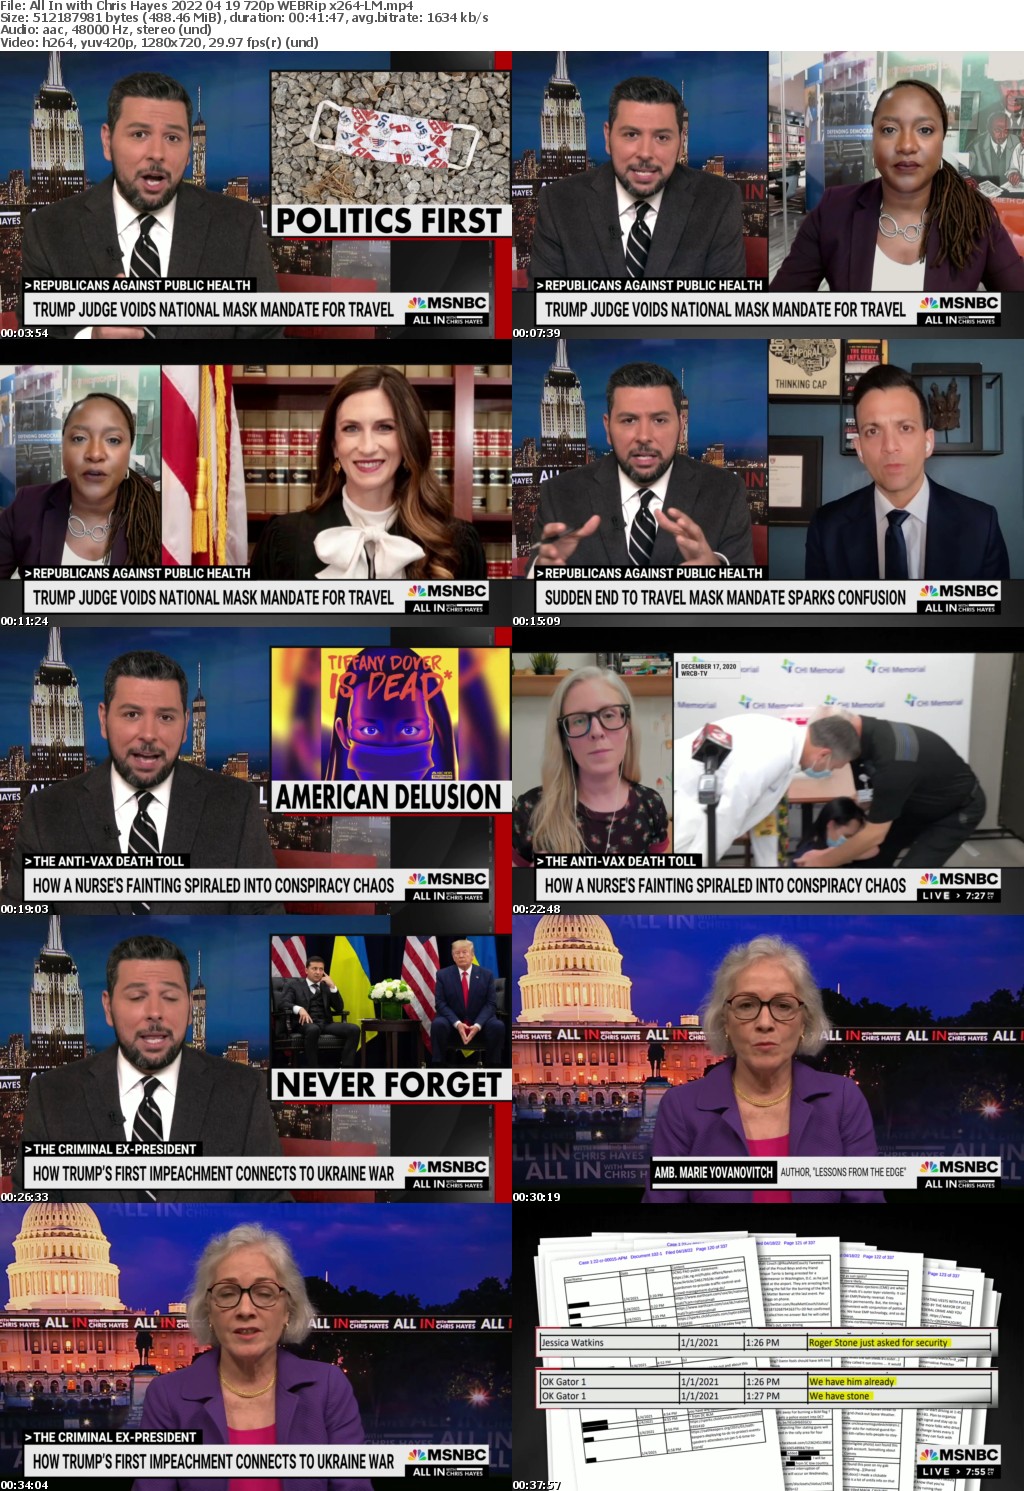 All In with Chris Hayes 2022 04 19 720p WEBRip x264-LM